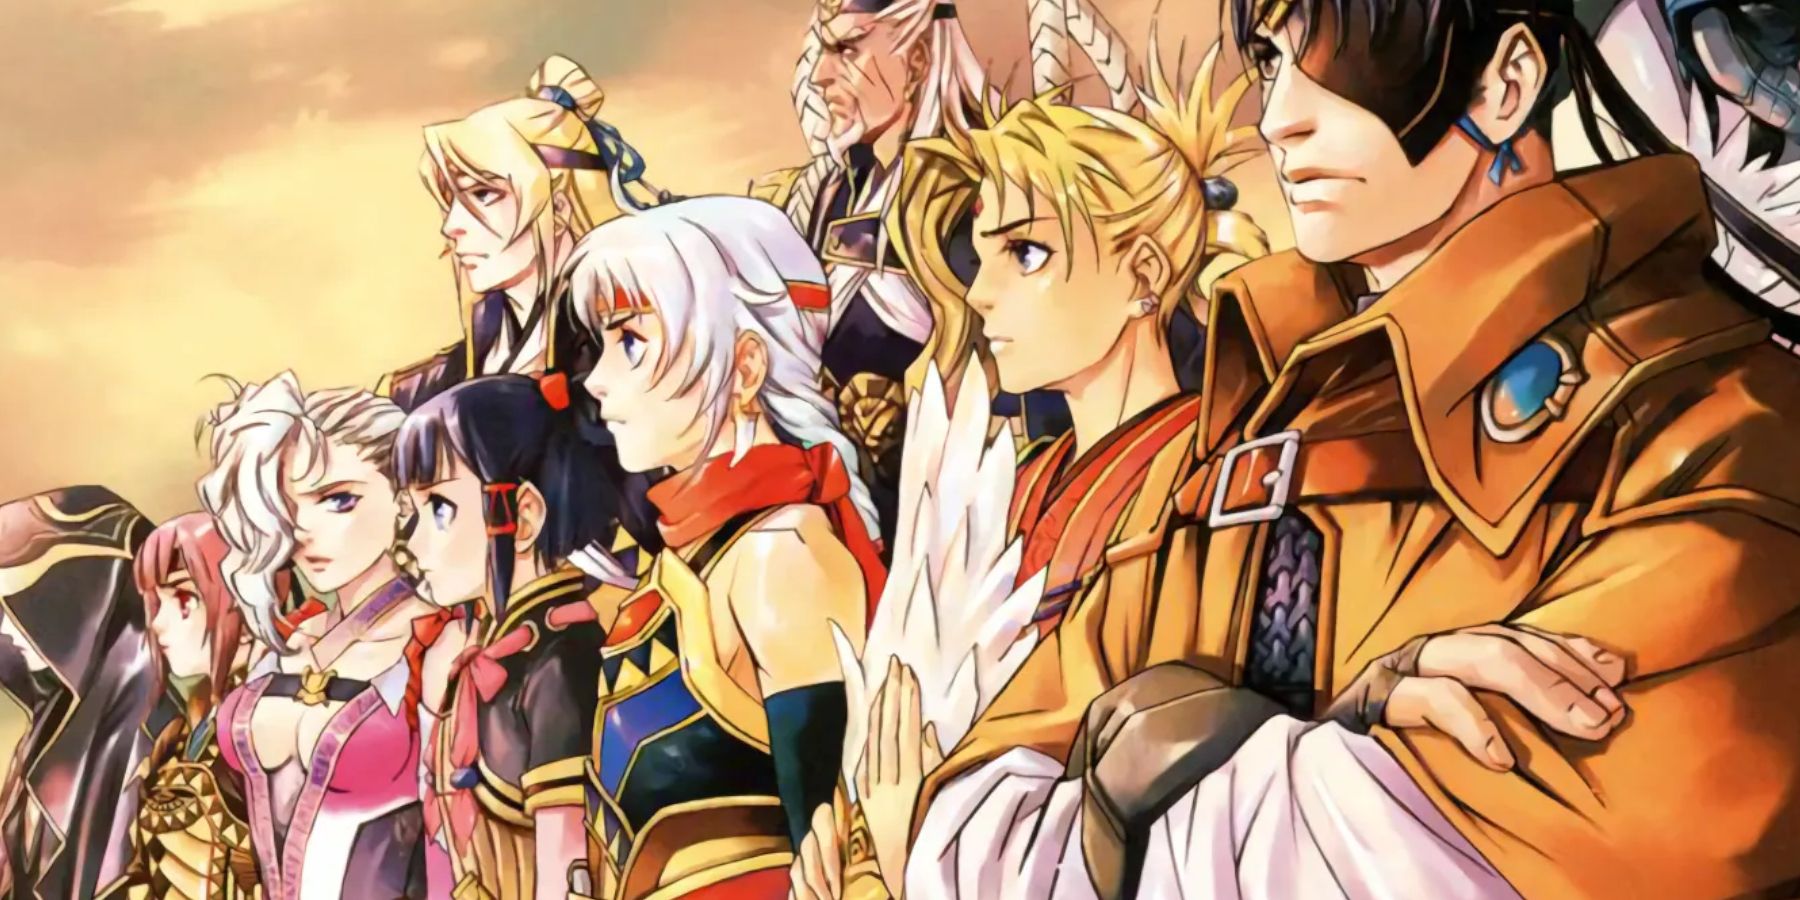 Suikoden 5 The Prince and his companions the 108 Stars lined up next to each other looking into the distance